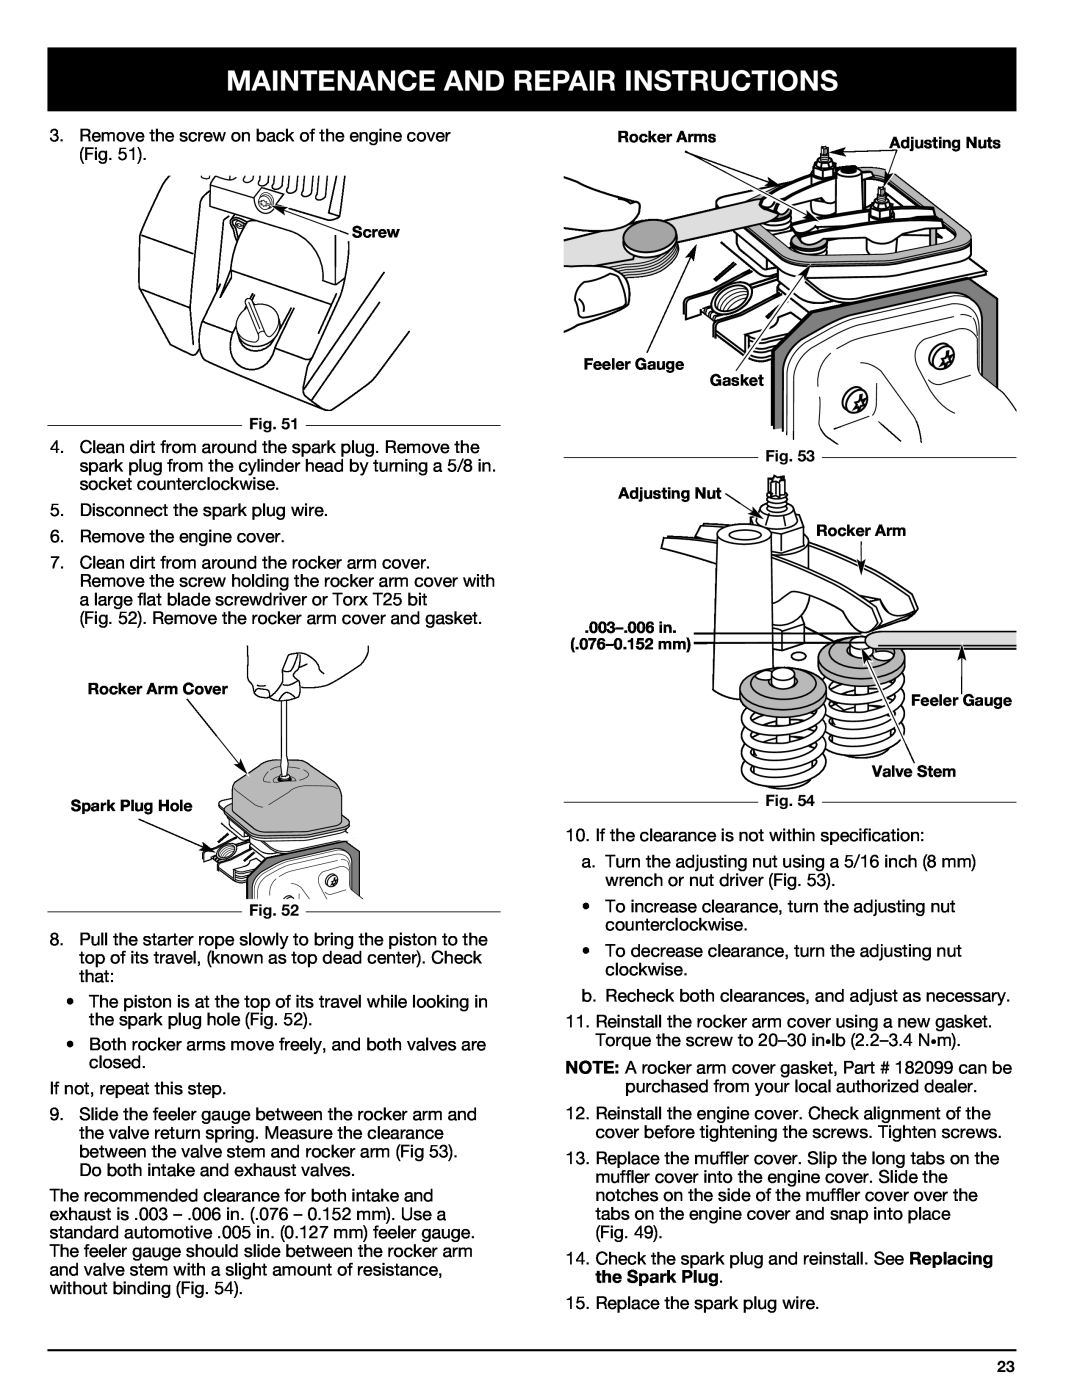 Ryobi 890r manual Maintenance And Repair Instructions, Remove the screw on back of the engine cover Fig 